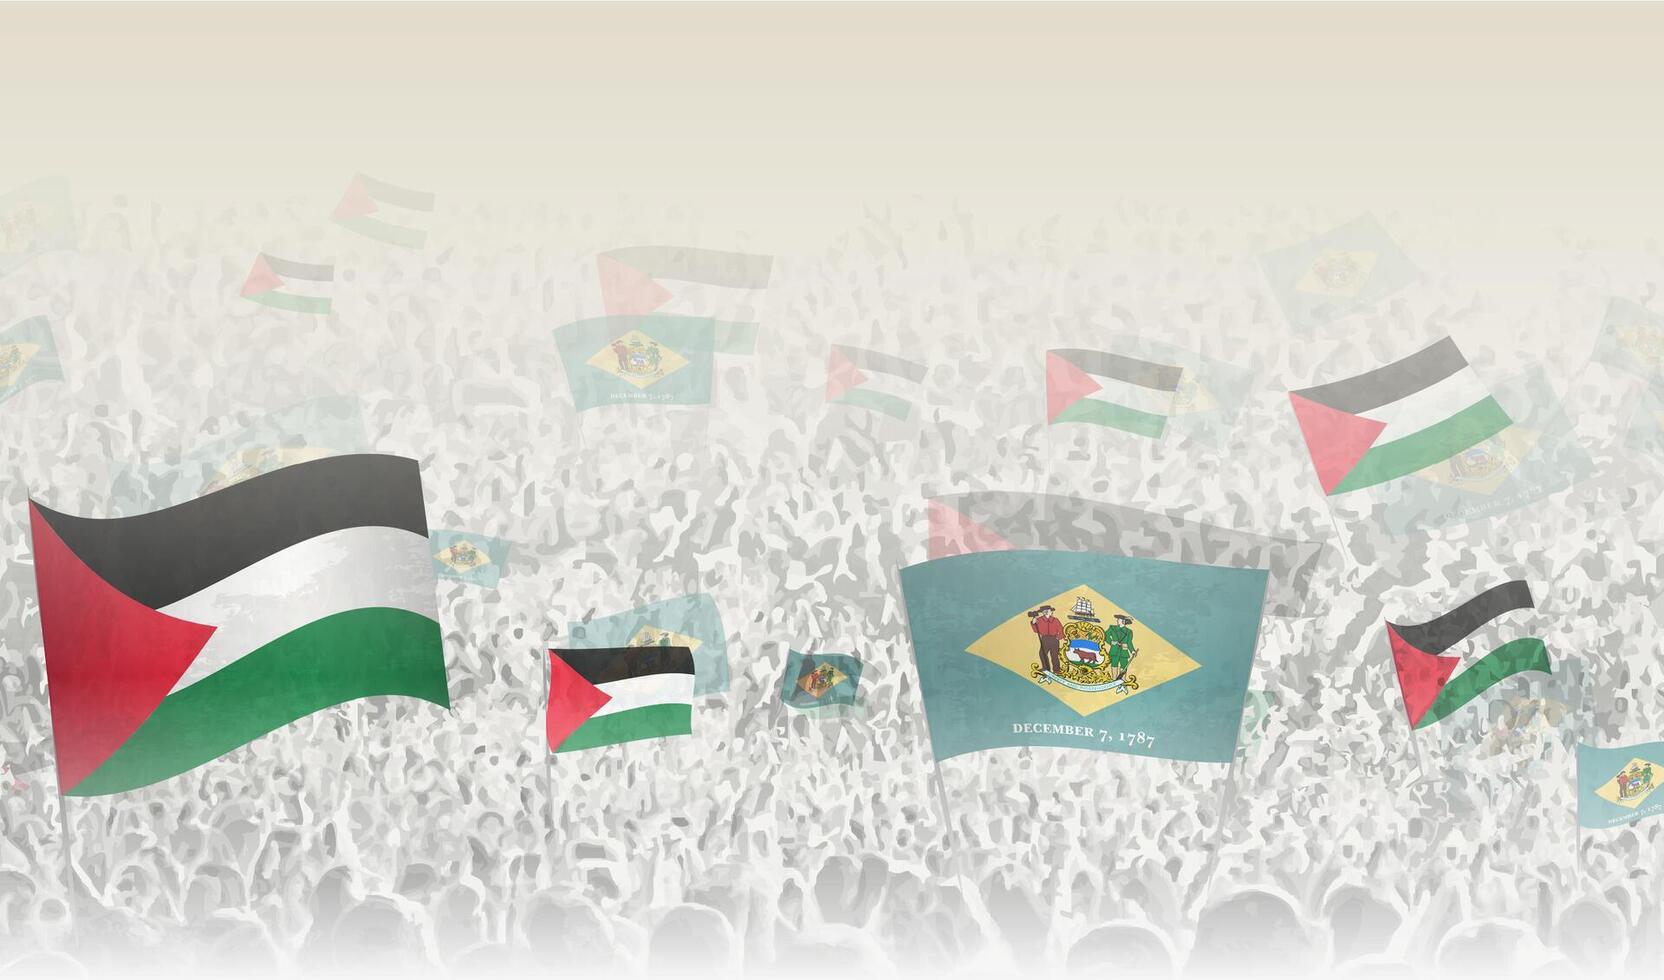 Palestine and Delaware flags in a crowd of cheering people. vector